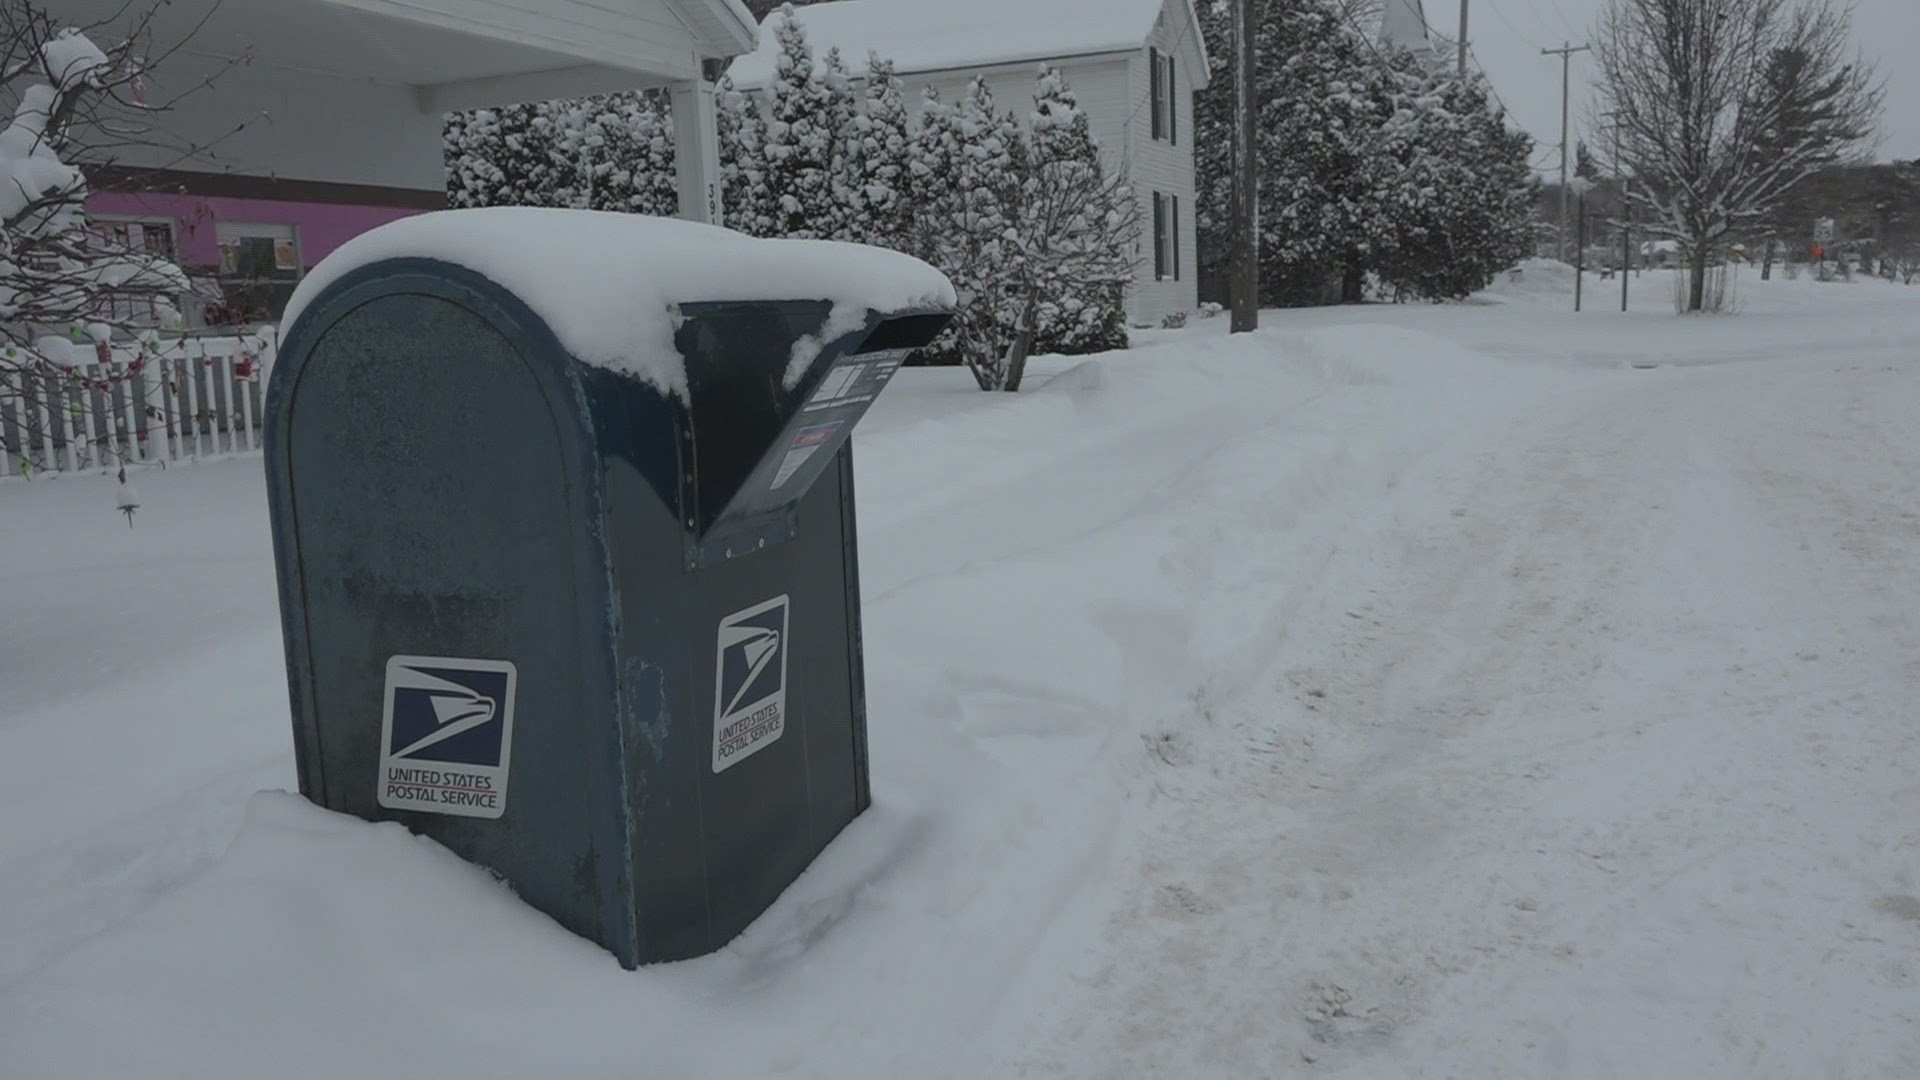 Postal workers are asking for patience as they attempt to get through the snow.